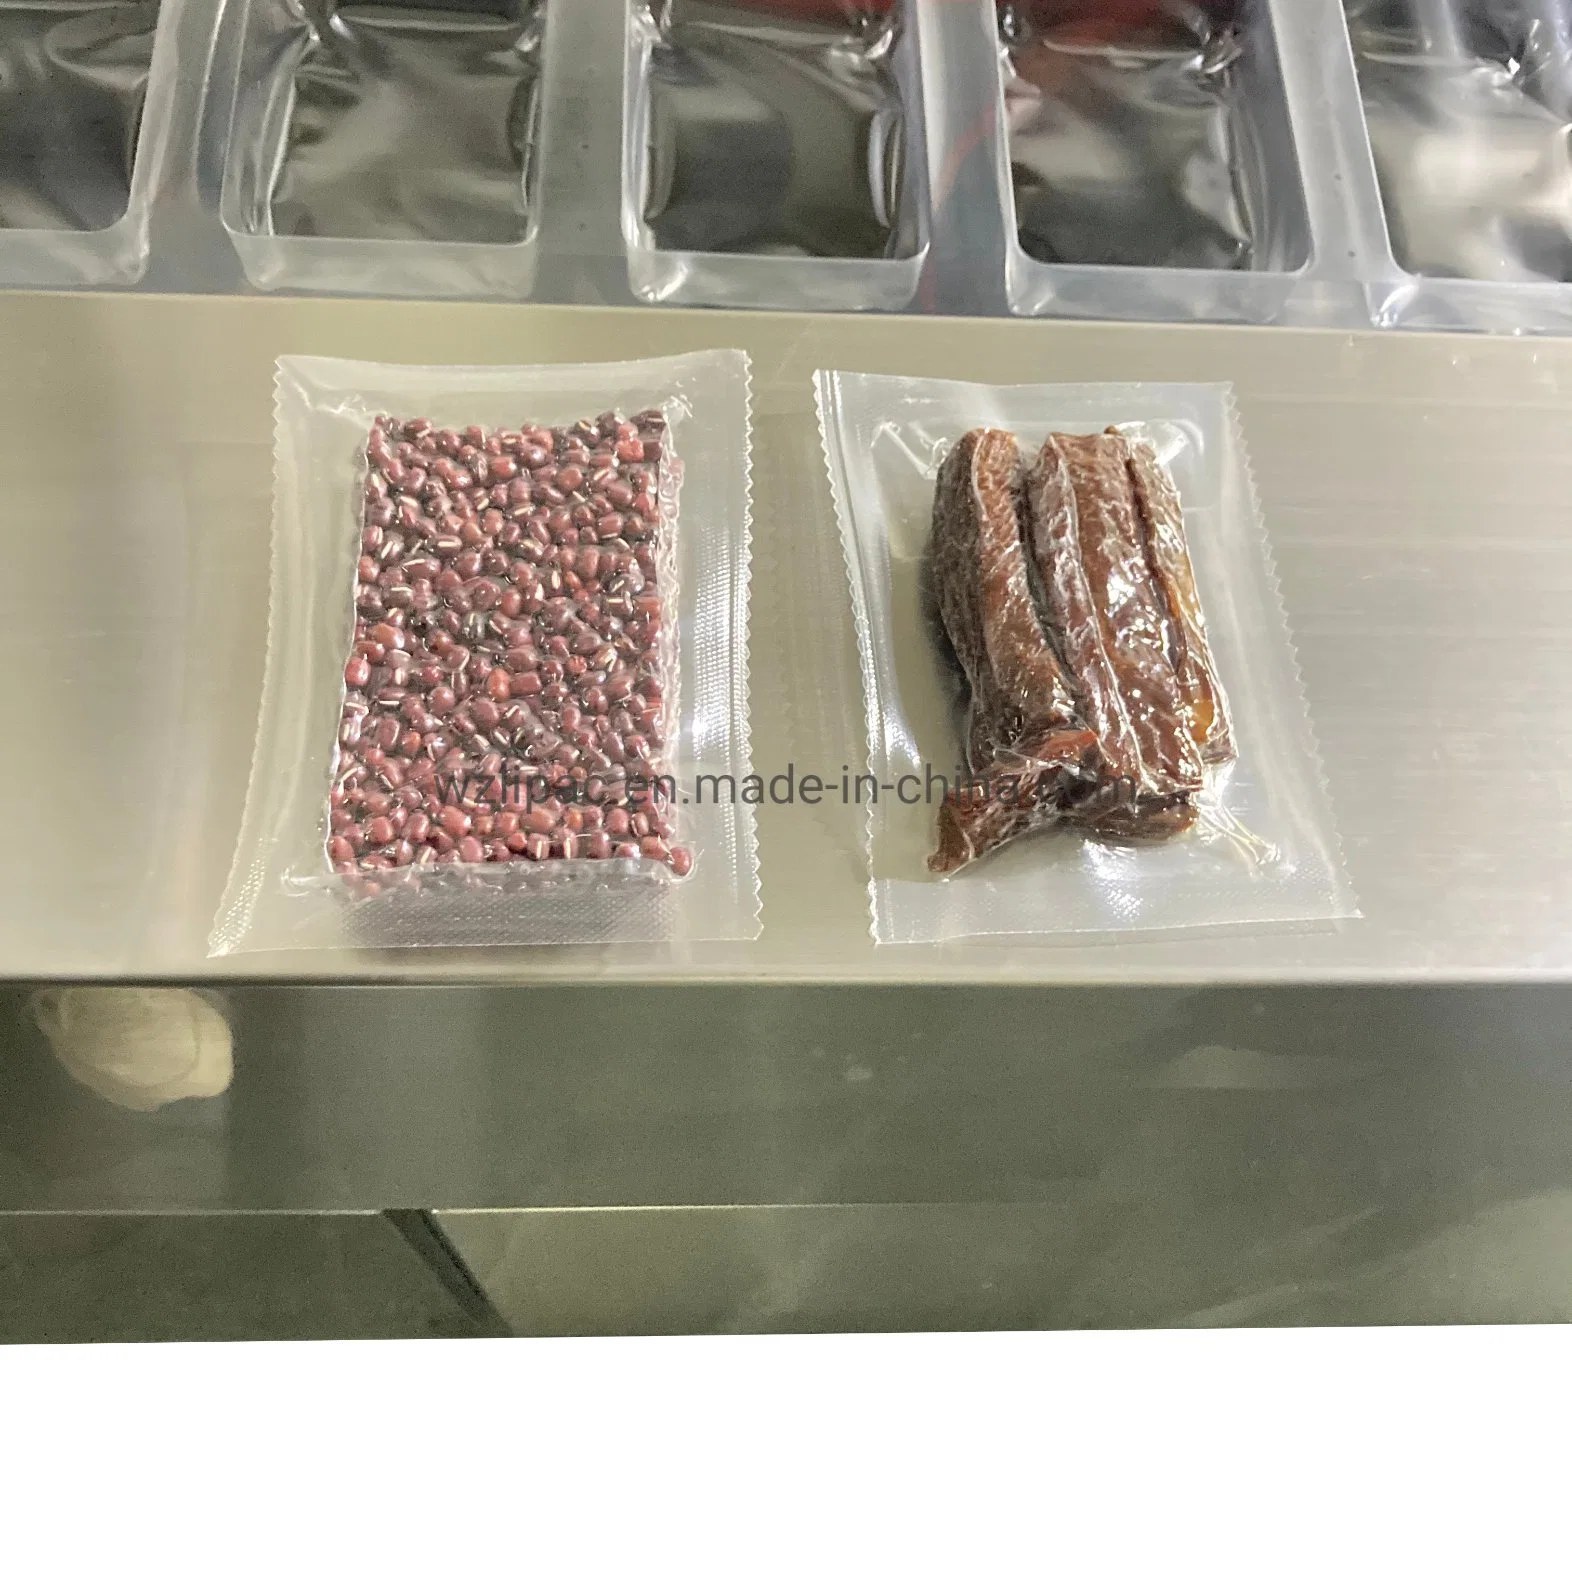 Lp-320 Full Automatic Blister Vacuum Forming Thermoforming Vacuum Packing Shrink Wrapping Machine for Food Sausage Egg and Spaghetti